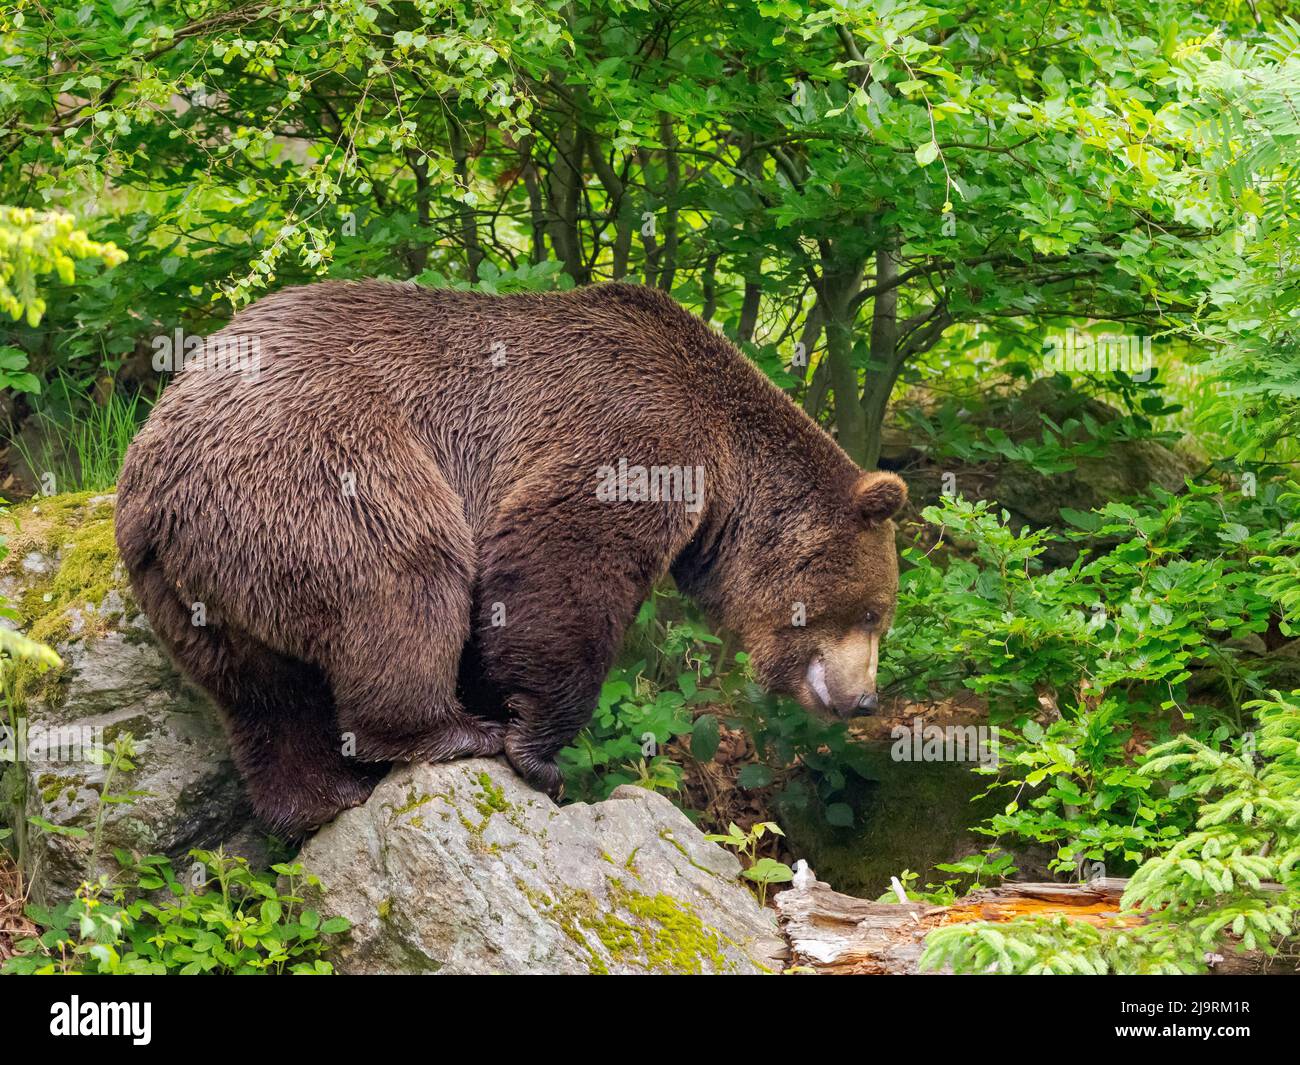 Eurasian brown bear or common brown bear during spring. Enclosure in the Bavarian Forest National Park, Germany, Bavaria Stock Photo